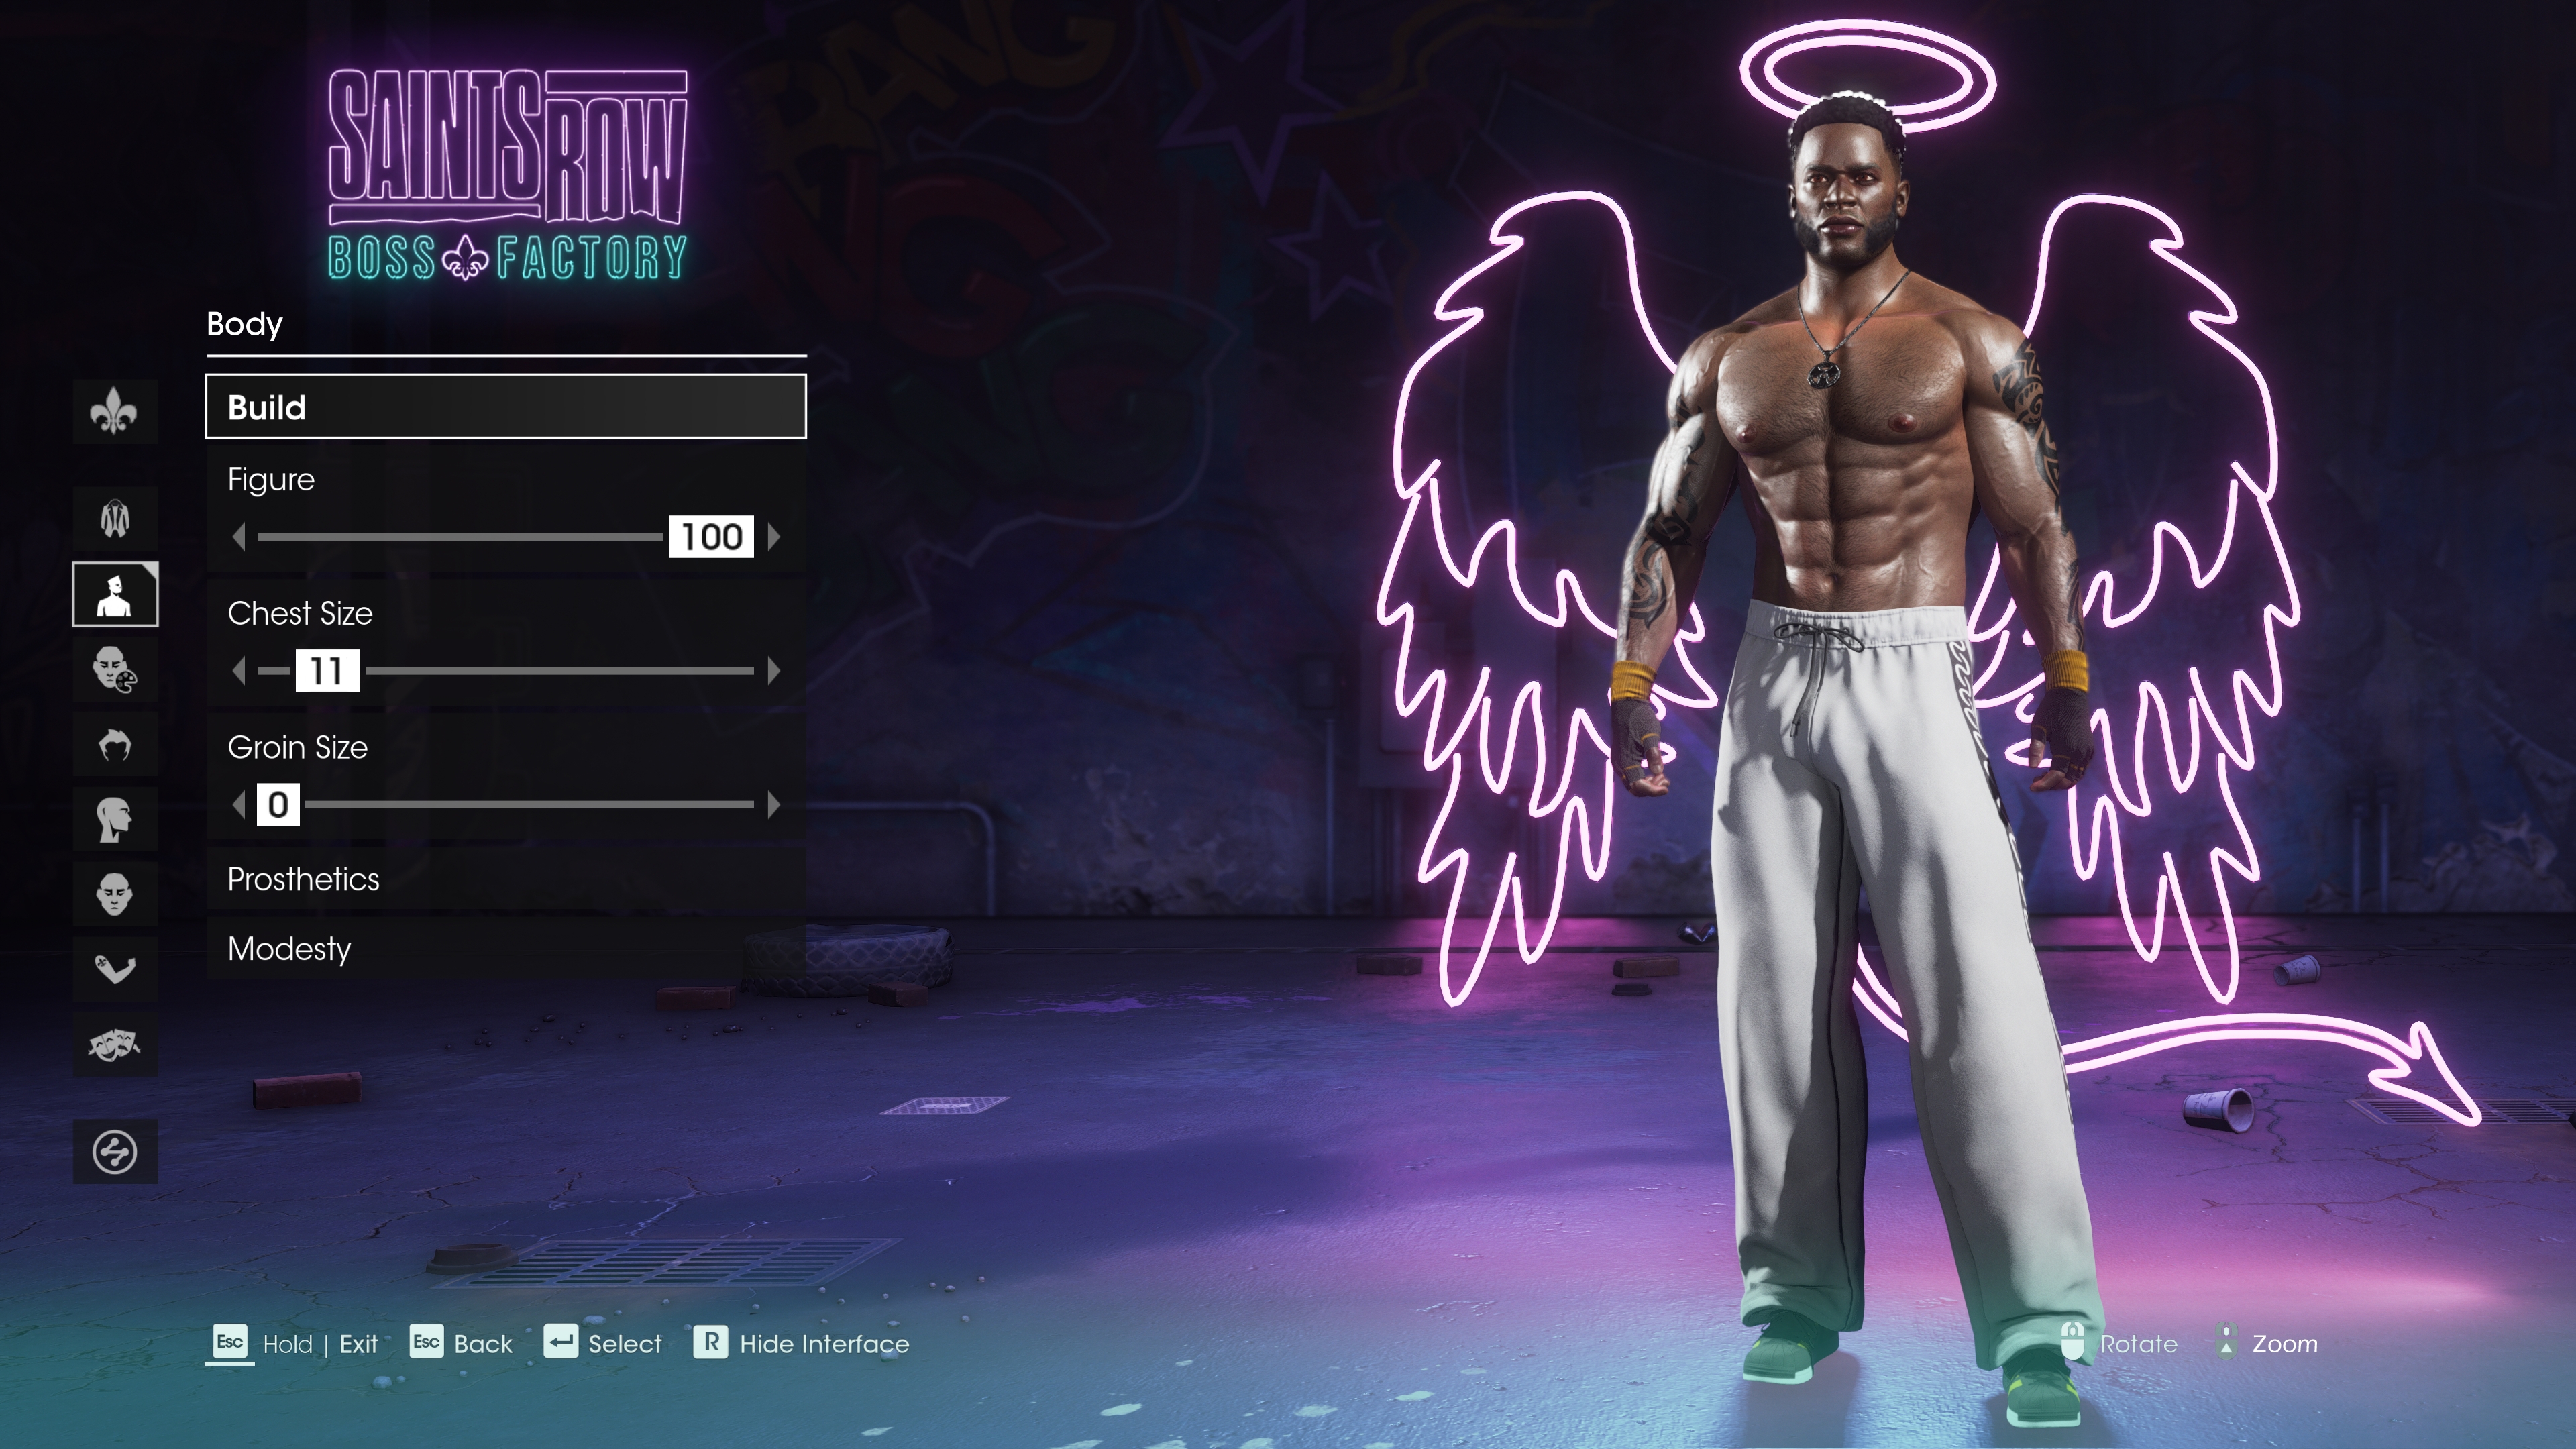 Saints Row (2022) characters – every new Saint in the squad